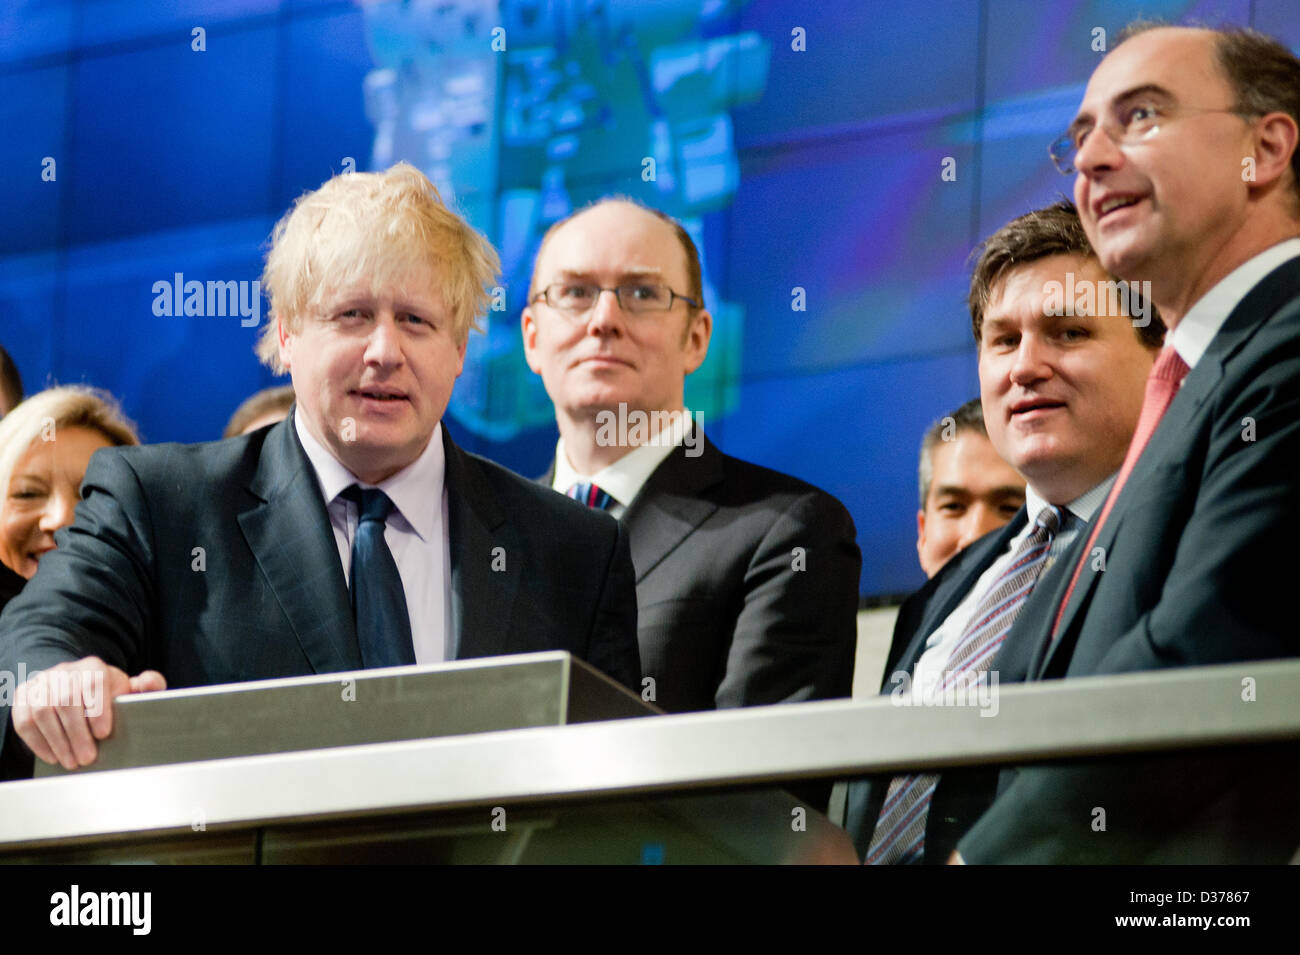 London, UK. 12th February 2013. The Mayor of London, Boris Johnson joins Xavier Rolet, CEO of London Stock Exchange Group to open the trading day, to encourage more science and technology companies to list in the capital. Credit: pcruciatti / Alamy Live News Stock Photo